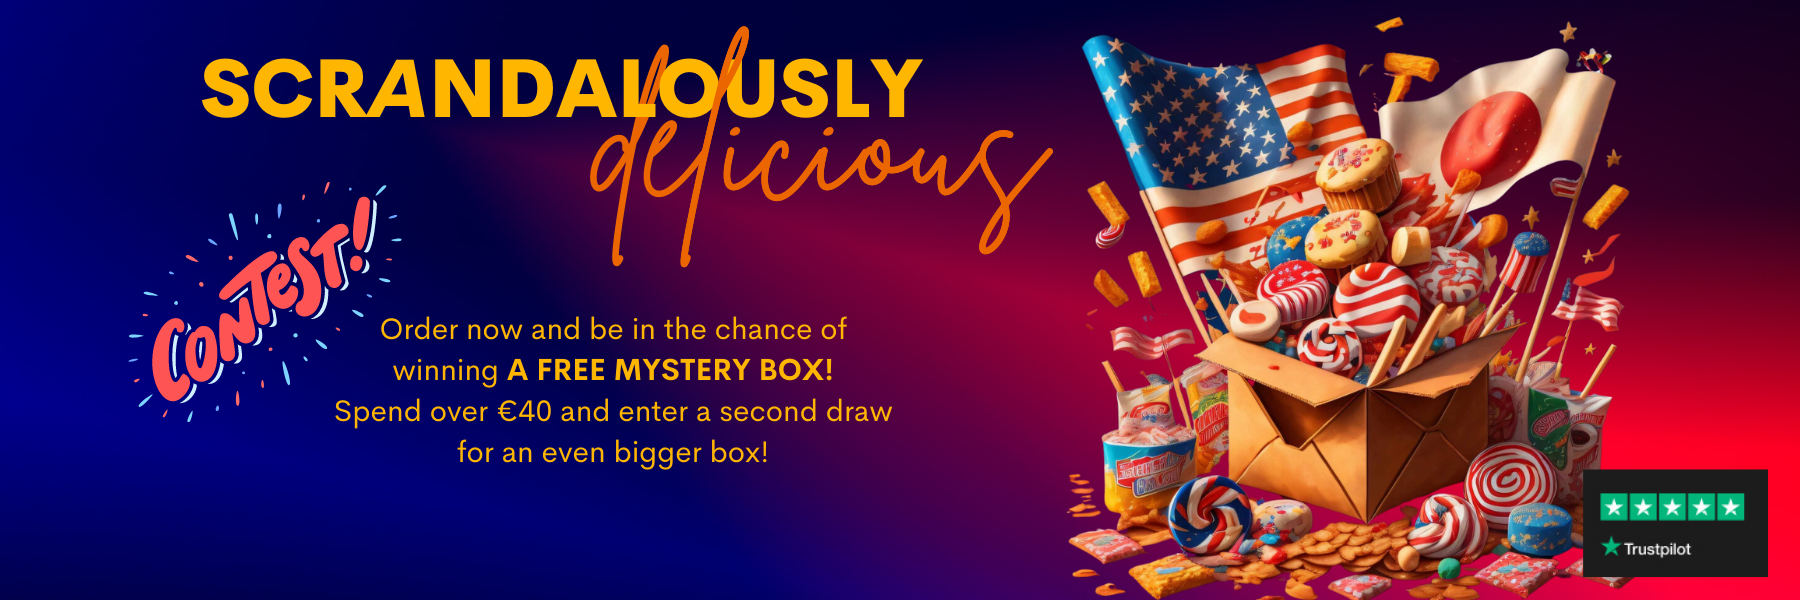 Scrandalously delicious - Order now to be in the chance of winning a free mystery box